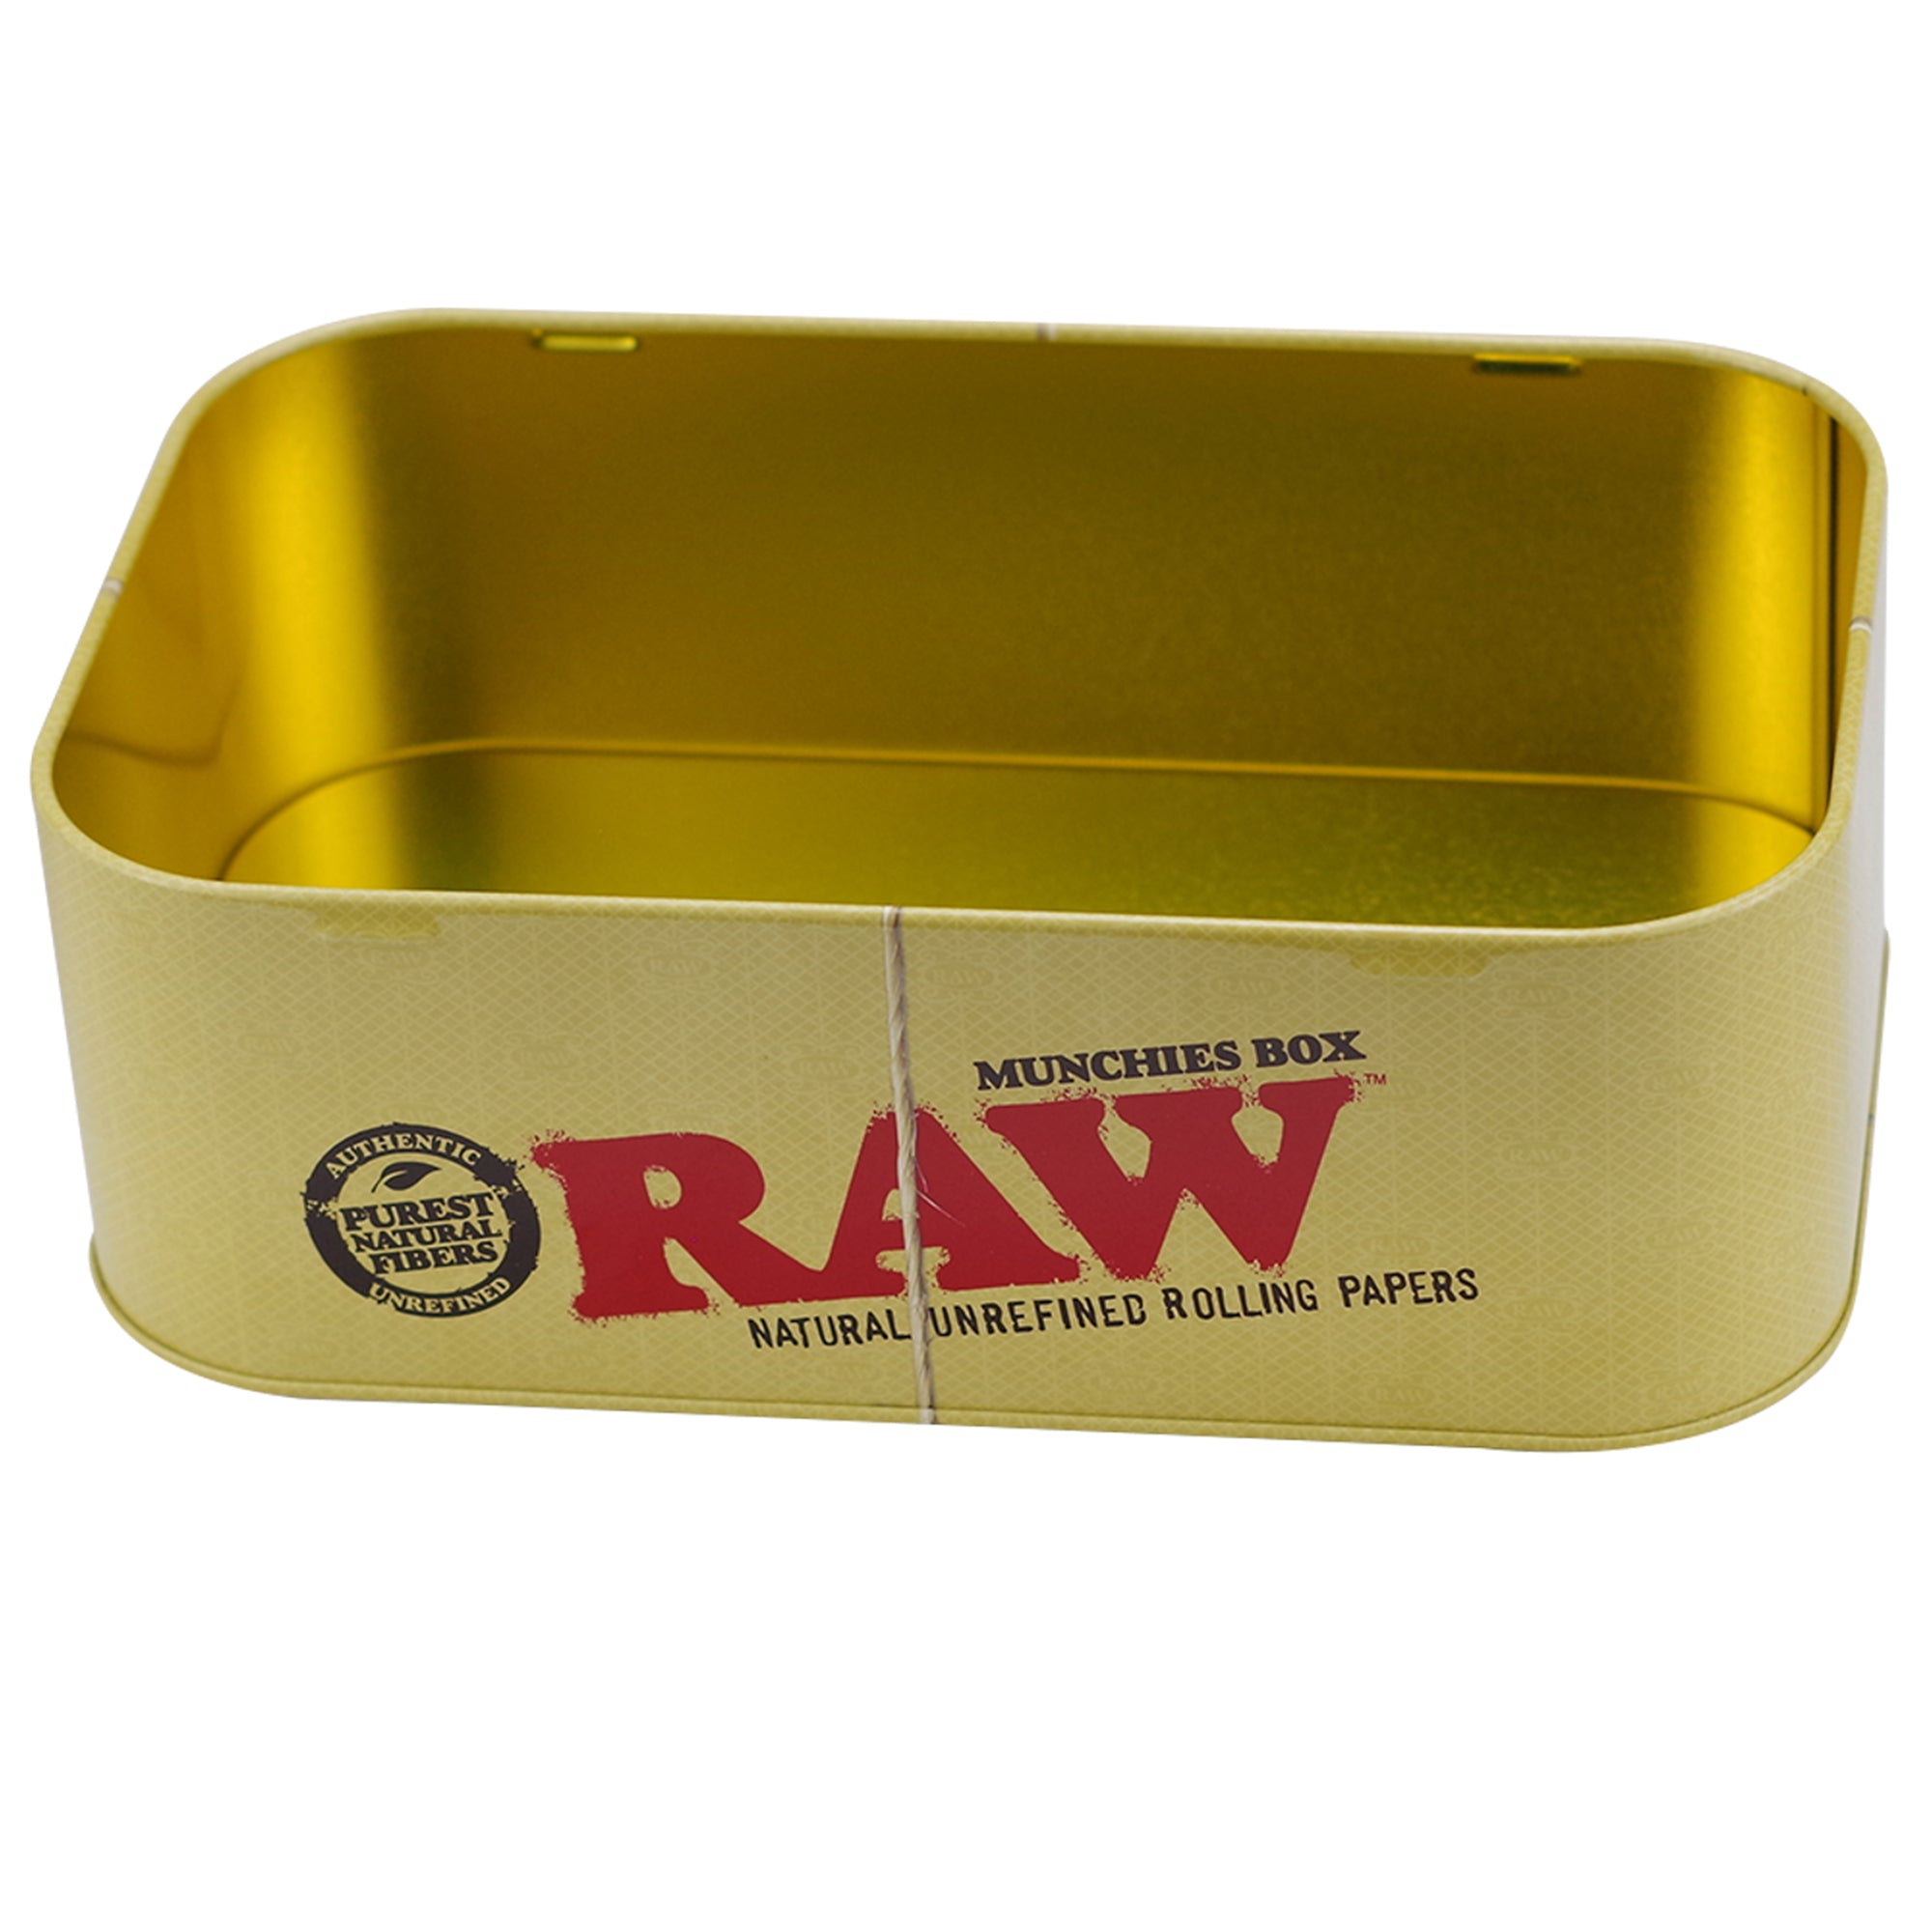 RAW Munchies Box With Rolling Tray Lid - Supply Natural